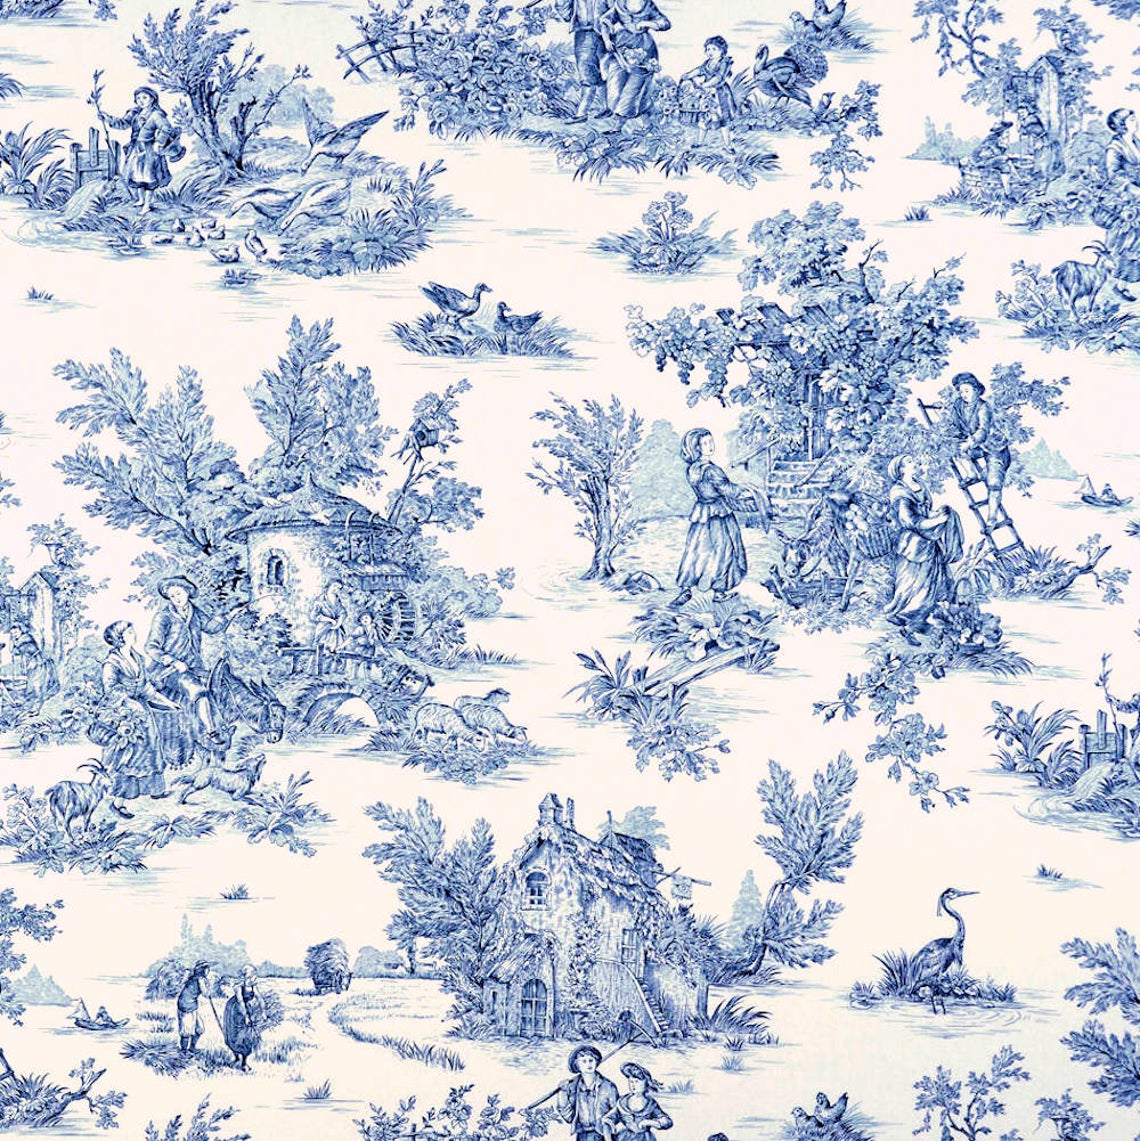 tailored tier cafe curtain panels pair in pastorale #2 blue on cream french country toile